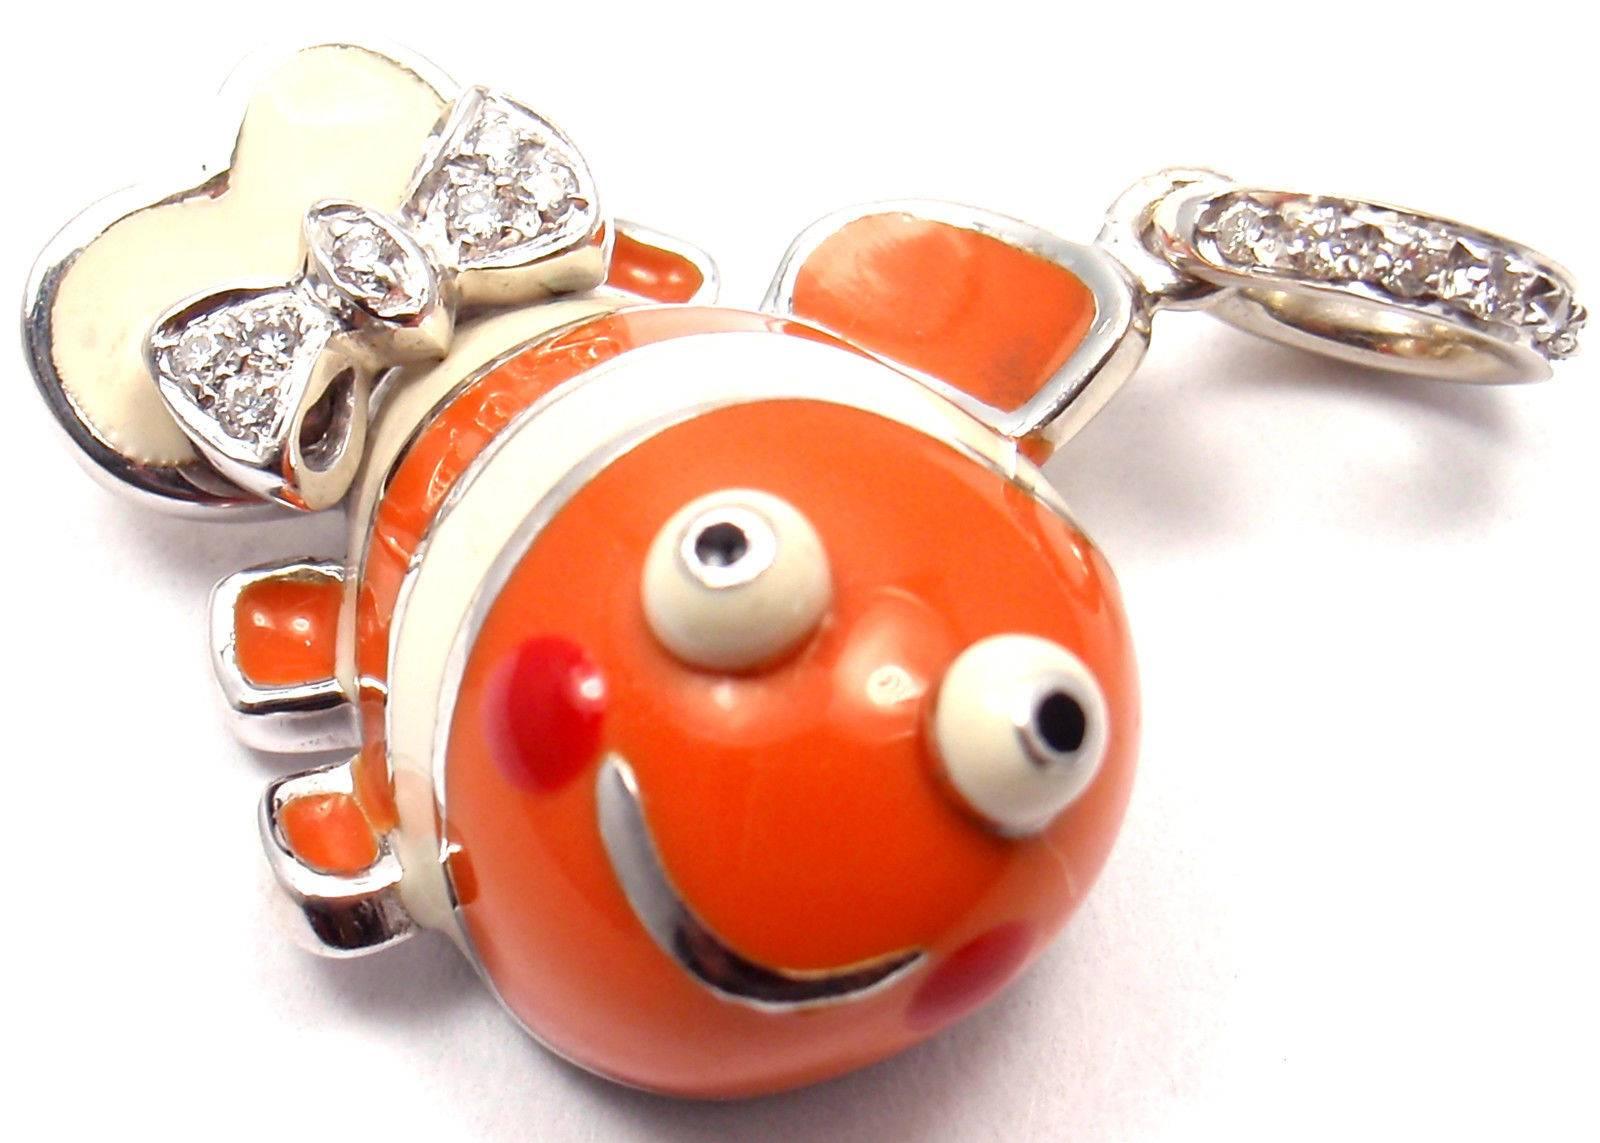 18k White Gold Diamond Clown Fish Pendant Charm by Aaron Basha. 
With 15 round brilliant cut diamonds VS1 clarity, G color total weight approx. .15ct
Retail Price: $7,200

Details: 
Weight: 9.6 grams
Measurements: 27mm x 23mm
Stamped Hallmarks: